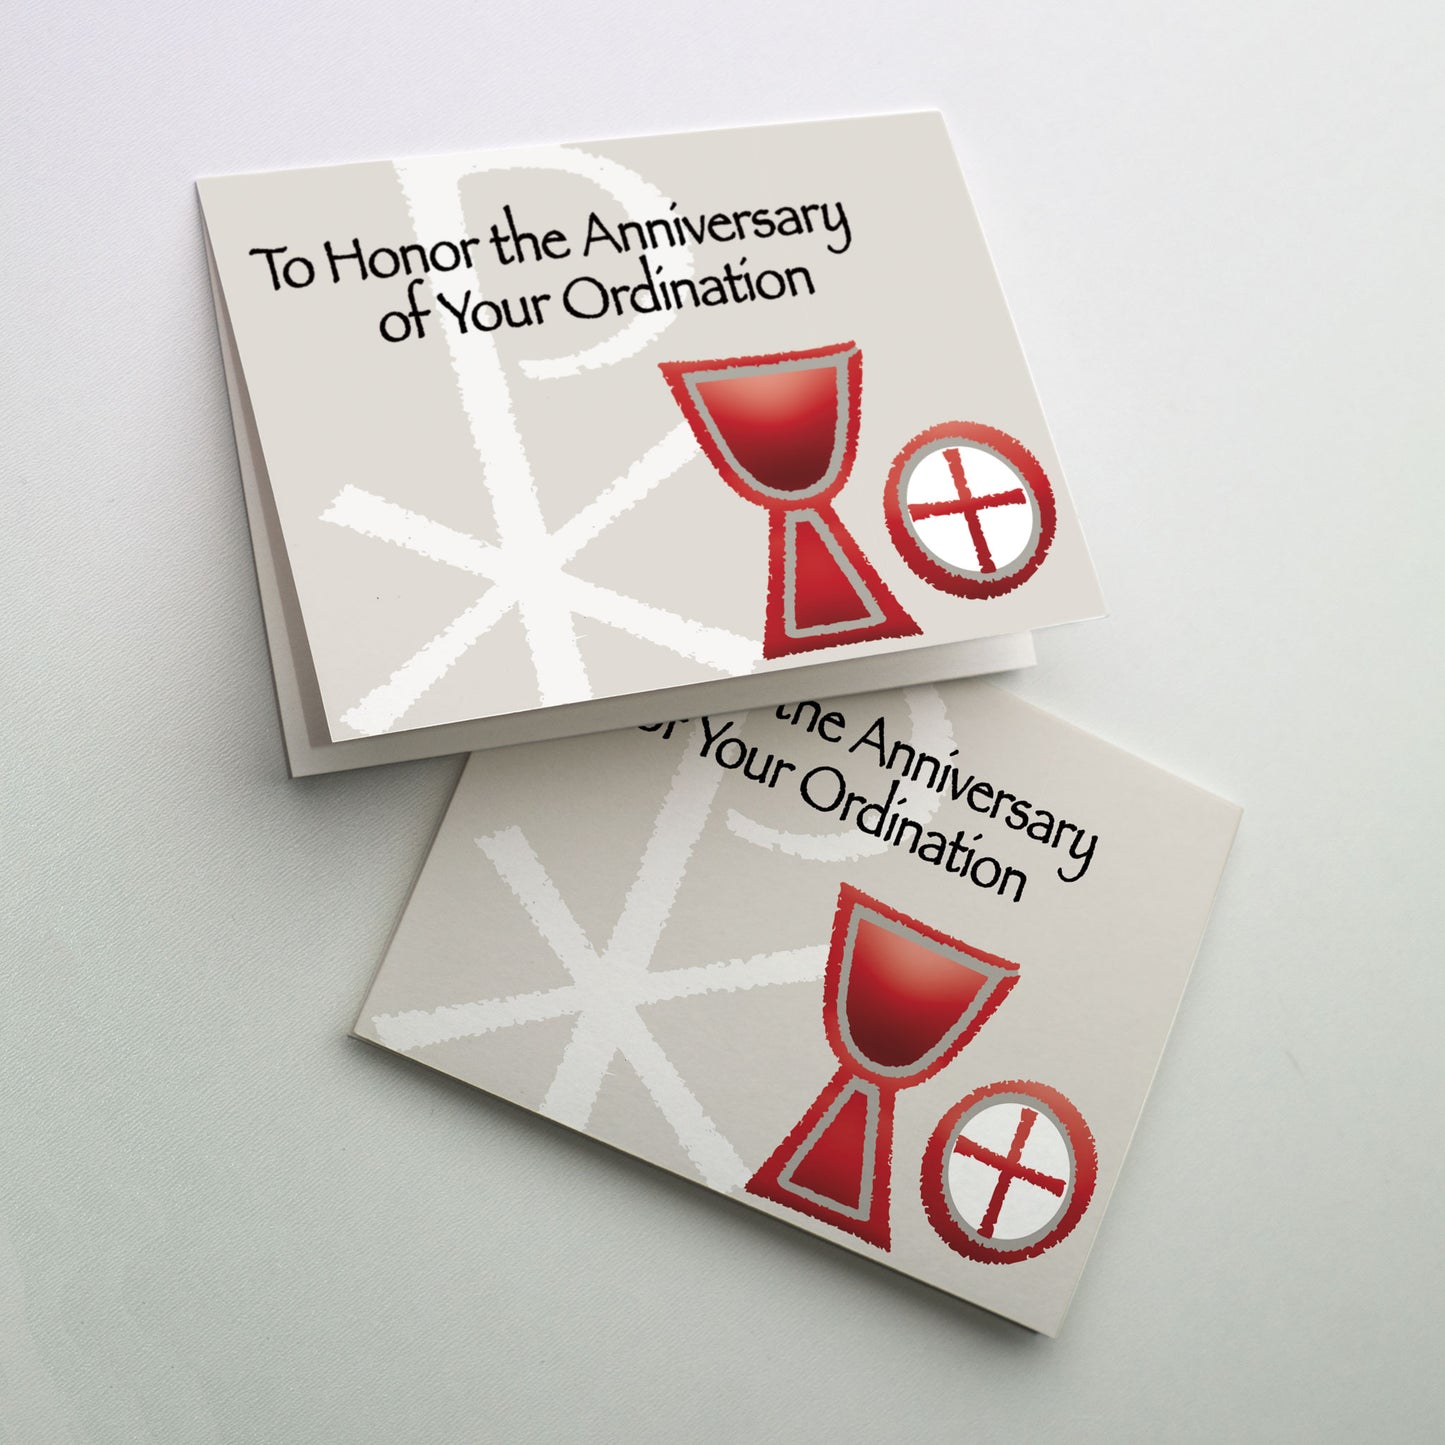 To Honor the Anniversary of Your Ordination - Ordination Anniversary Card